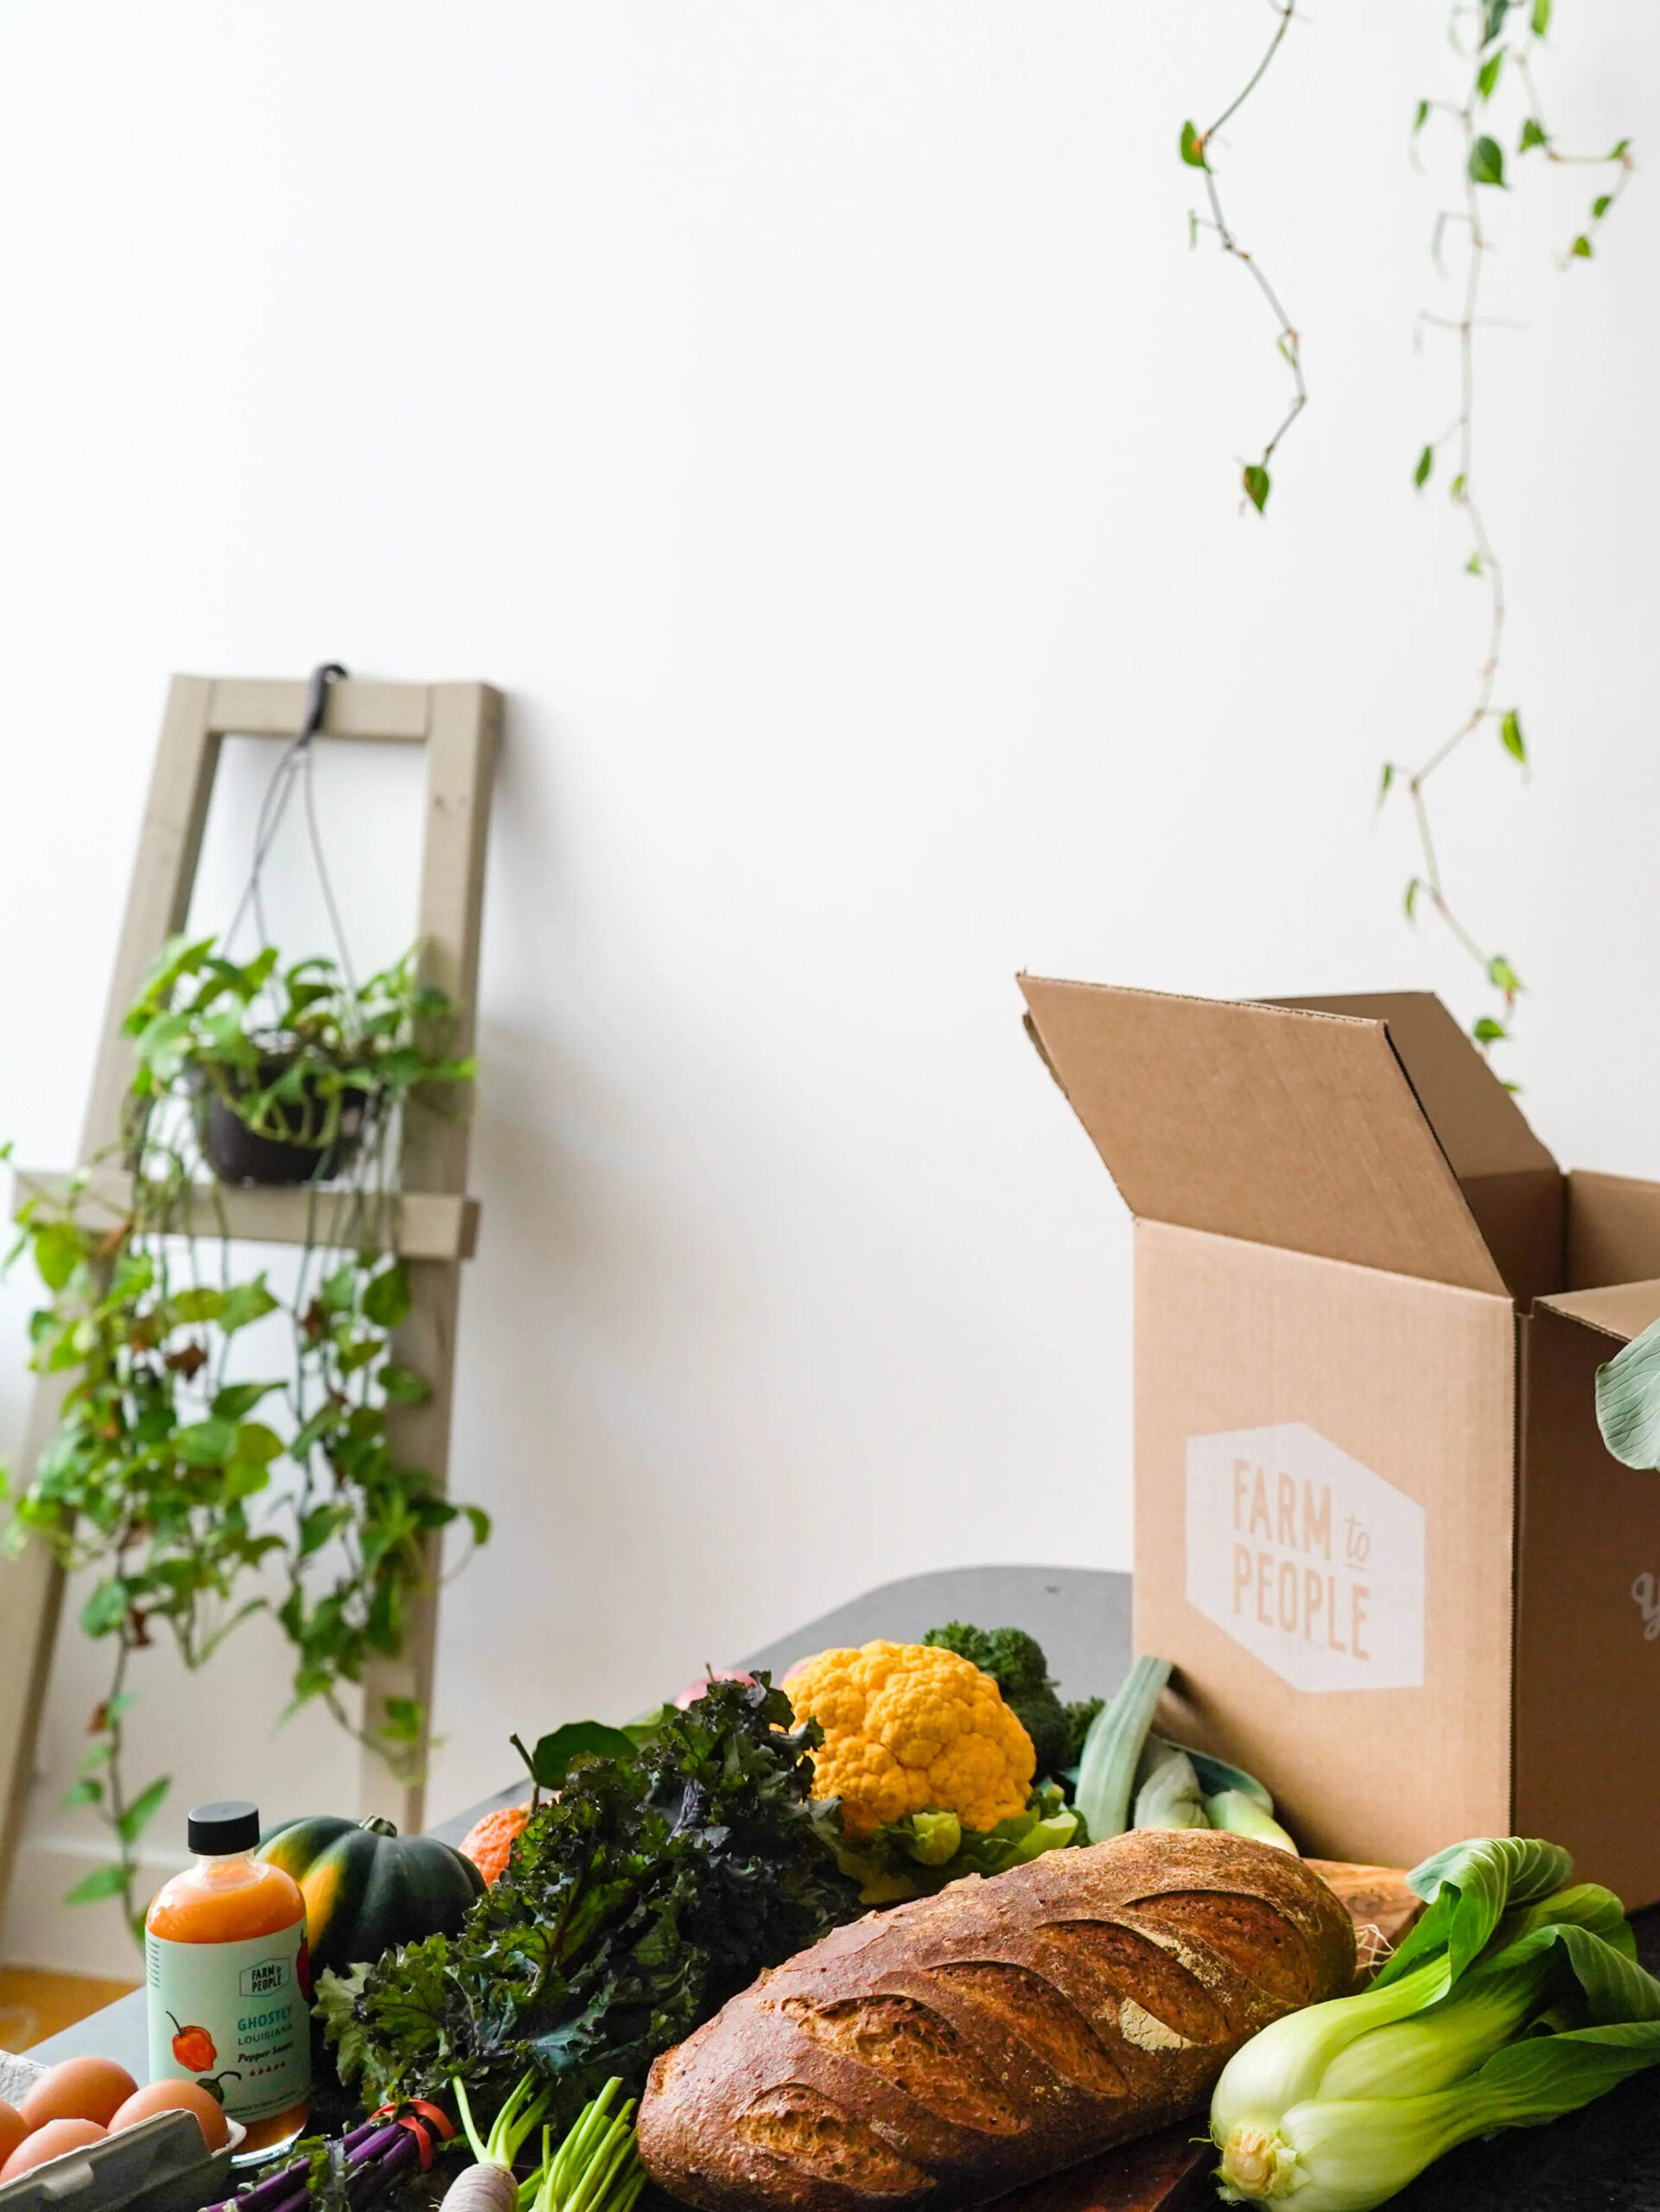 An open Farm To People box, set on a table covered with produce and a loaf of bread.